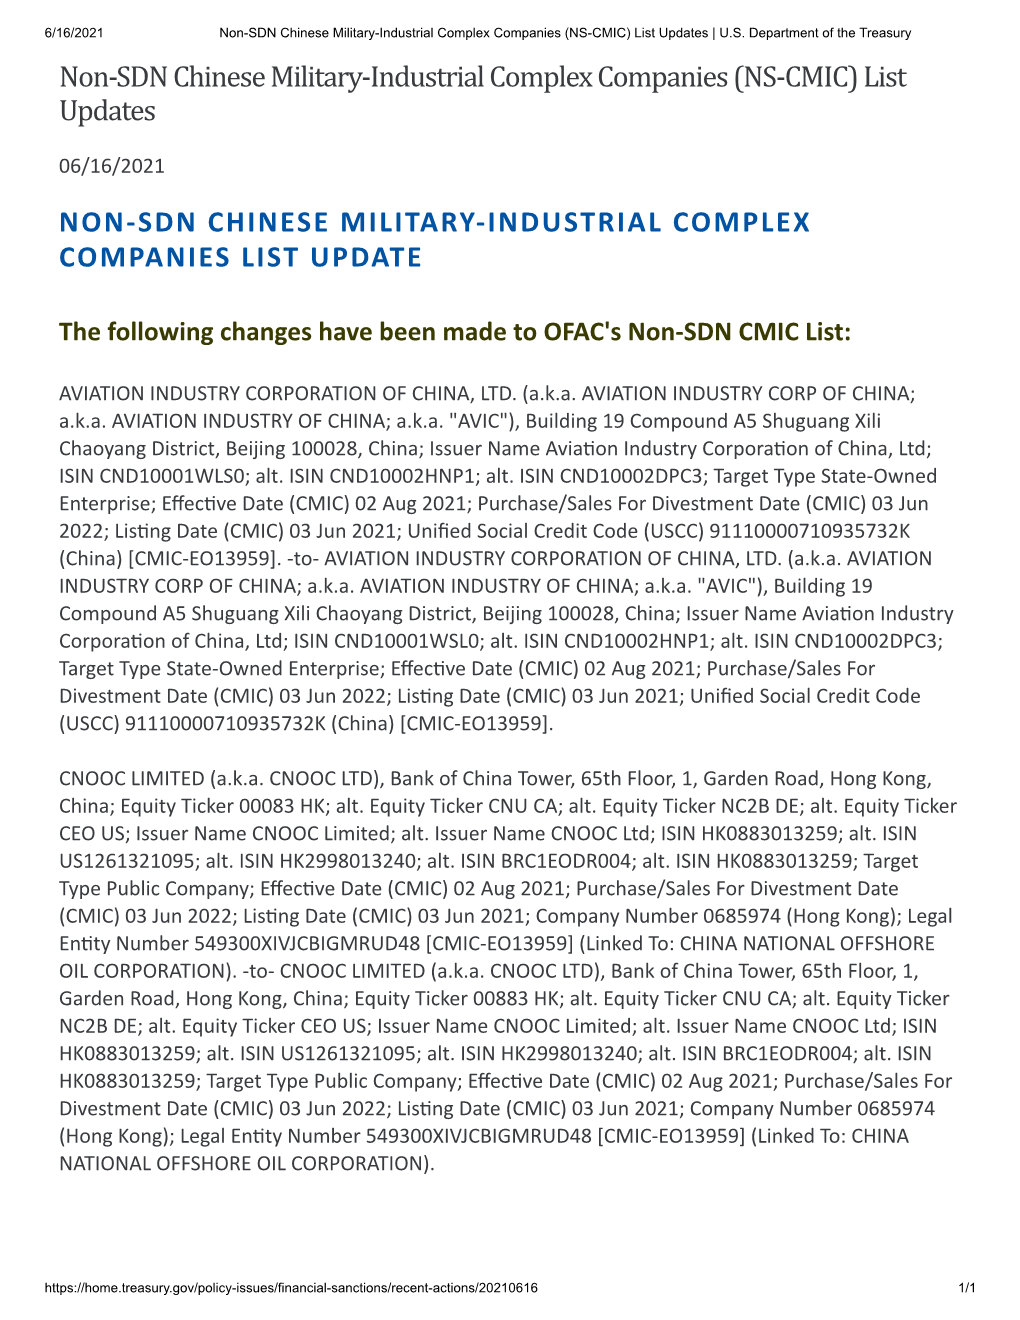 Non-SDN Chinese Military-Industrial Complex Companies (NS-CMIC) List Updates | U.S